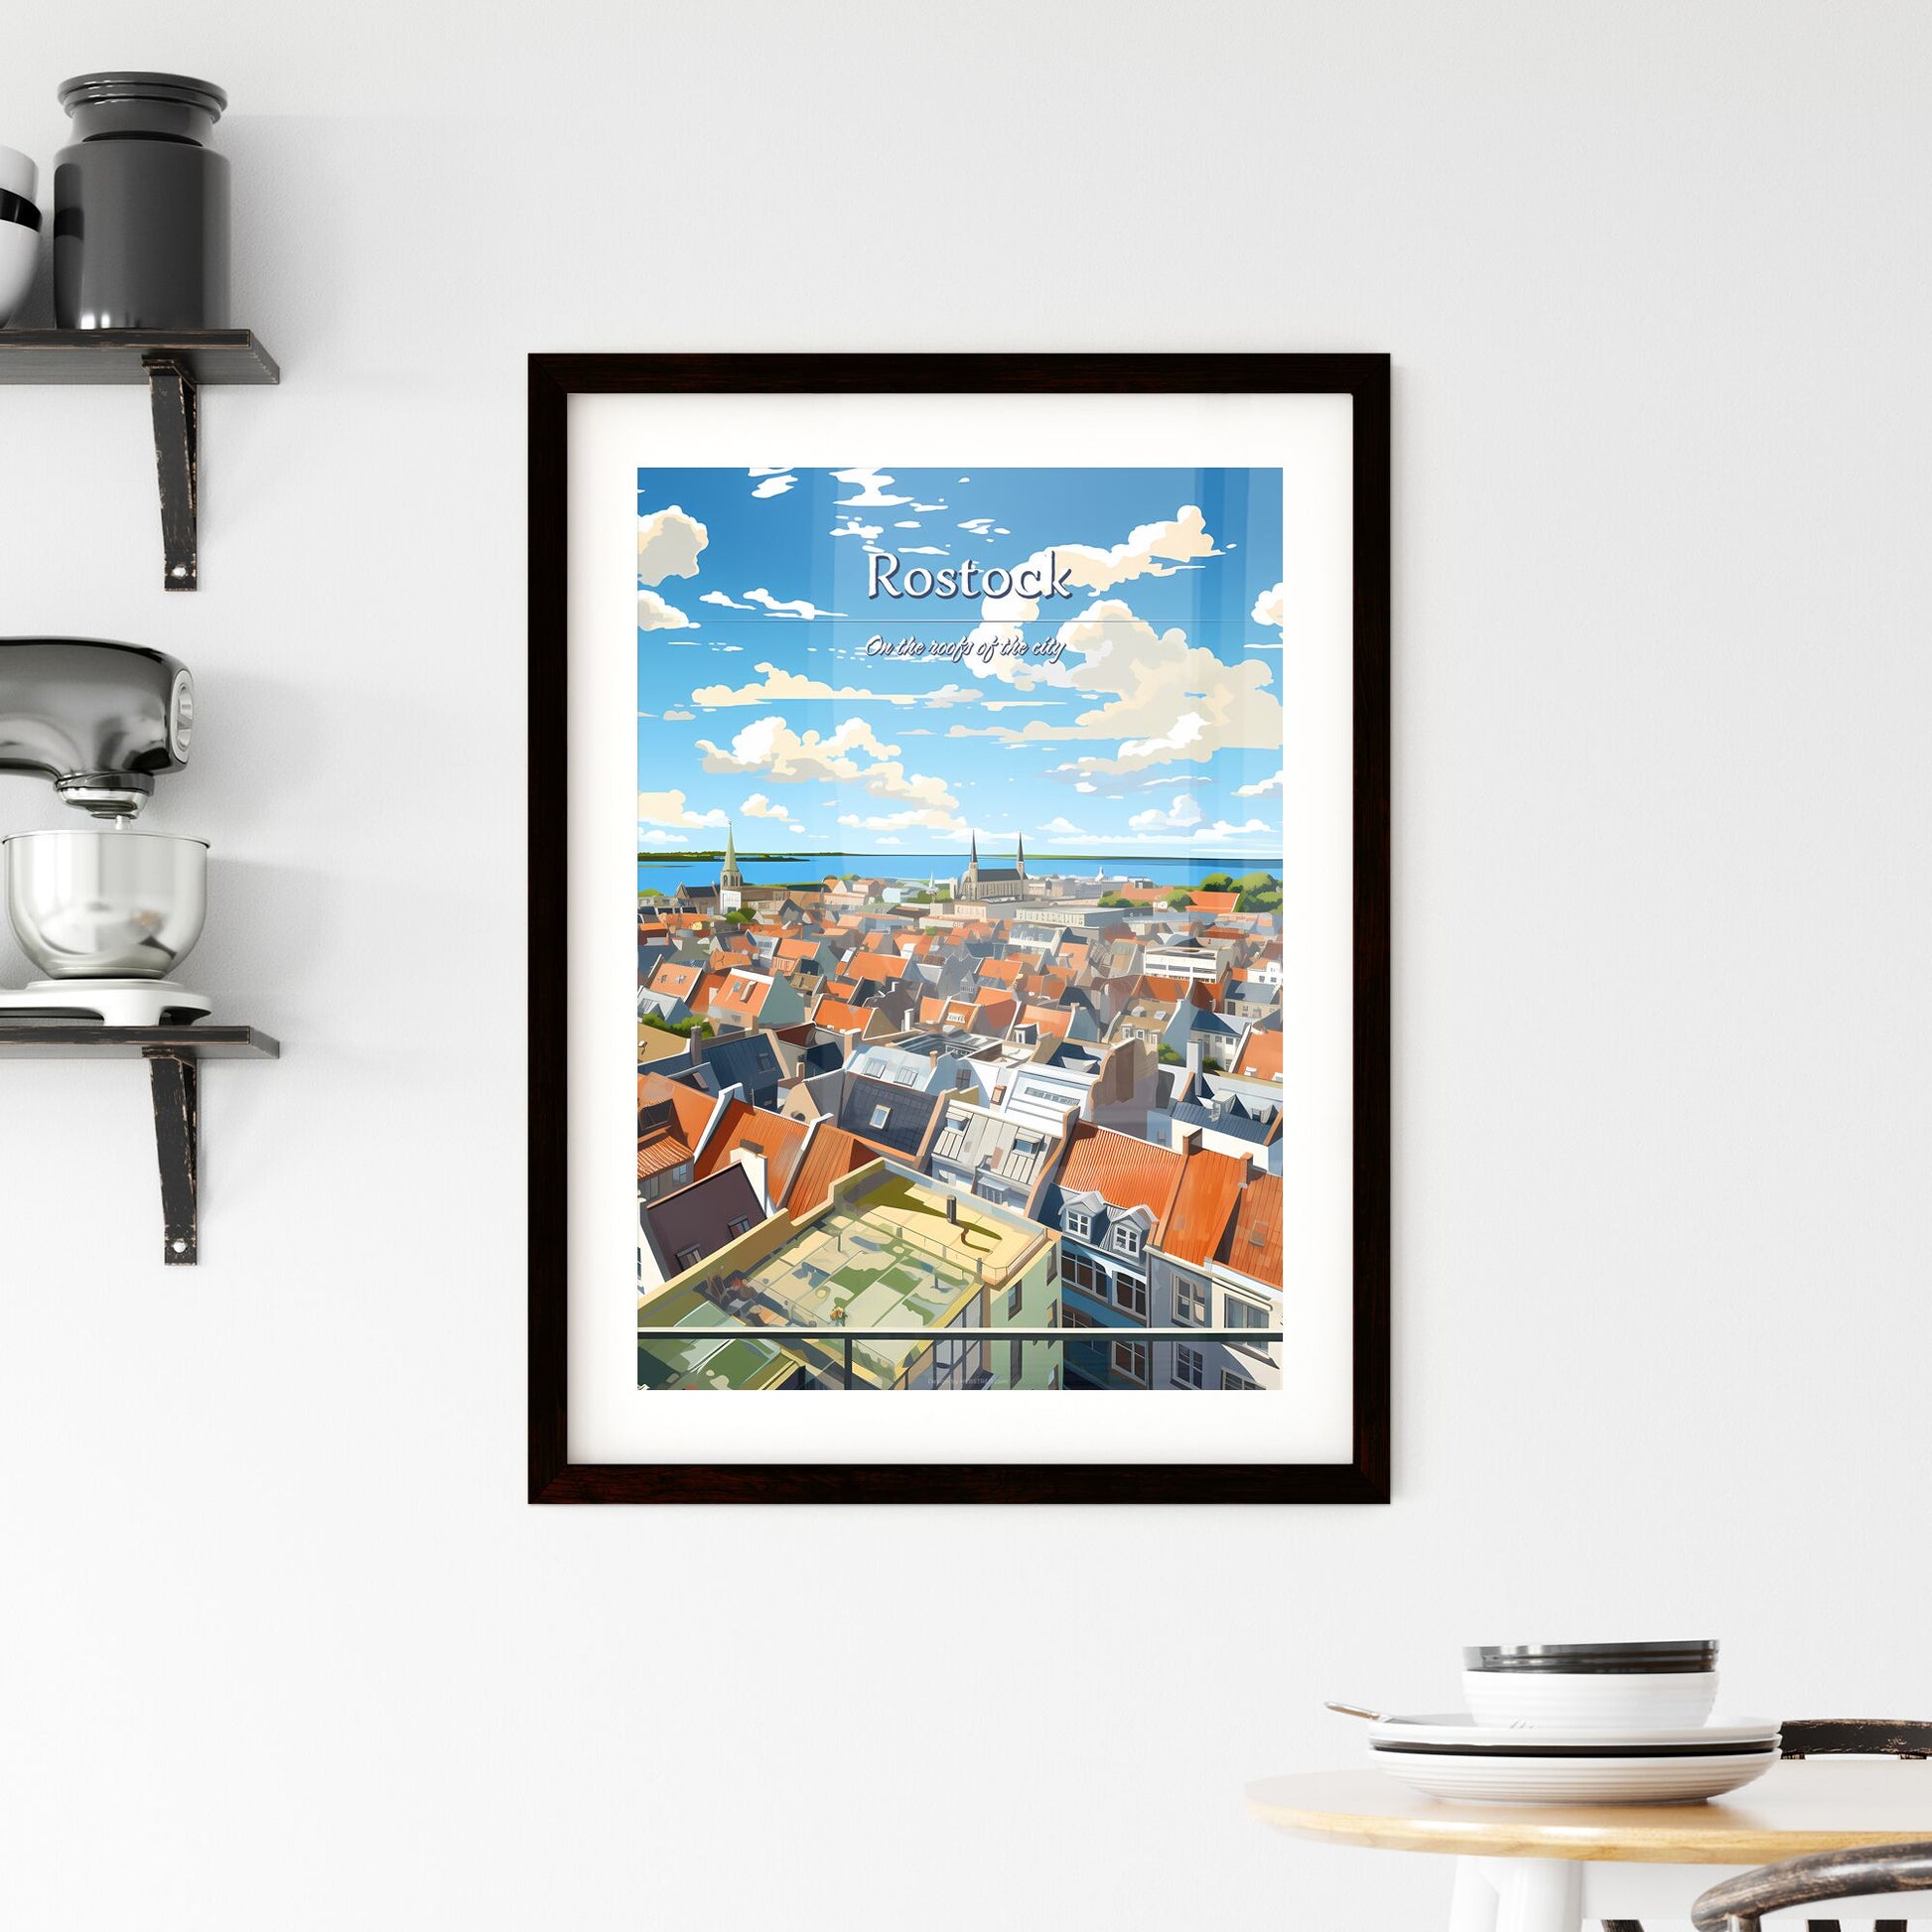 On the roofs of Rostock - Art print of a city with many roofs and a body of water Default Title